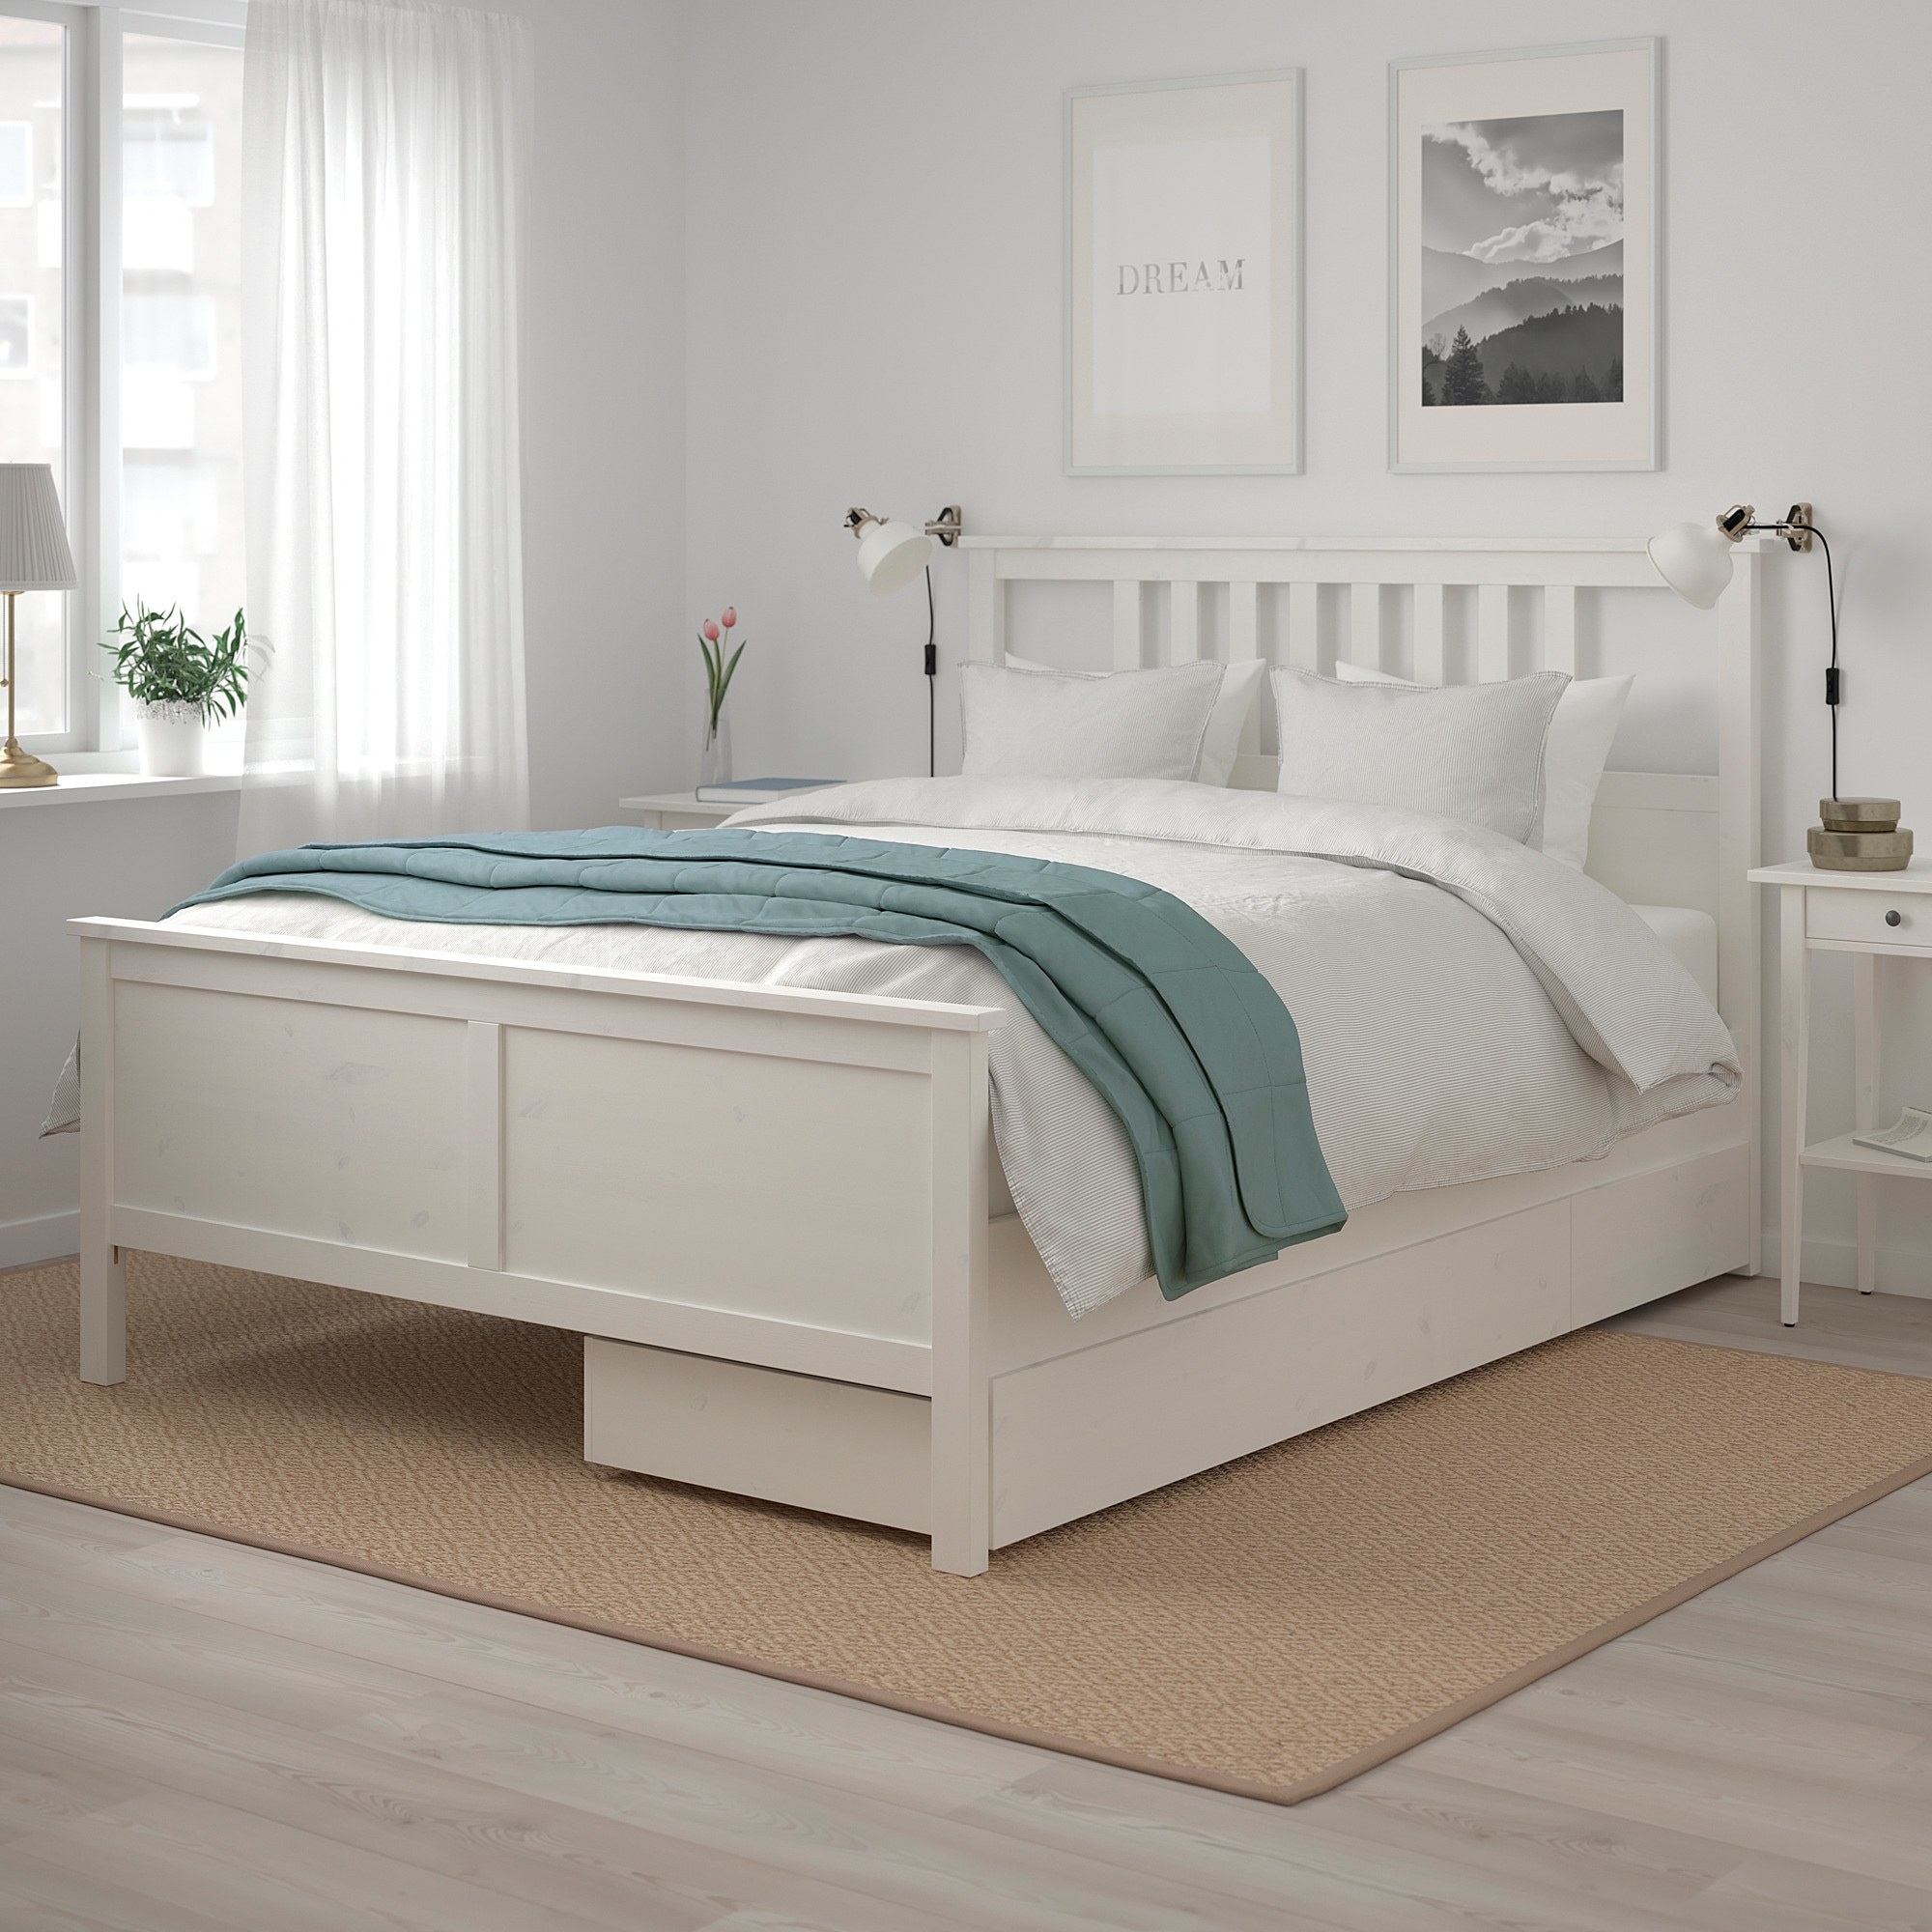 27 Bed Frames That Only Look, Ikea Bed Frames With Storage King Size Mattress